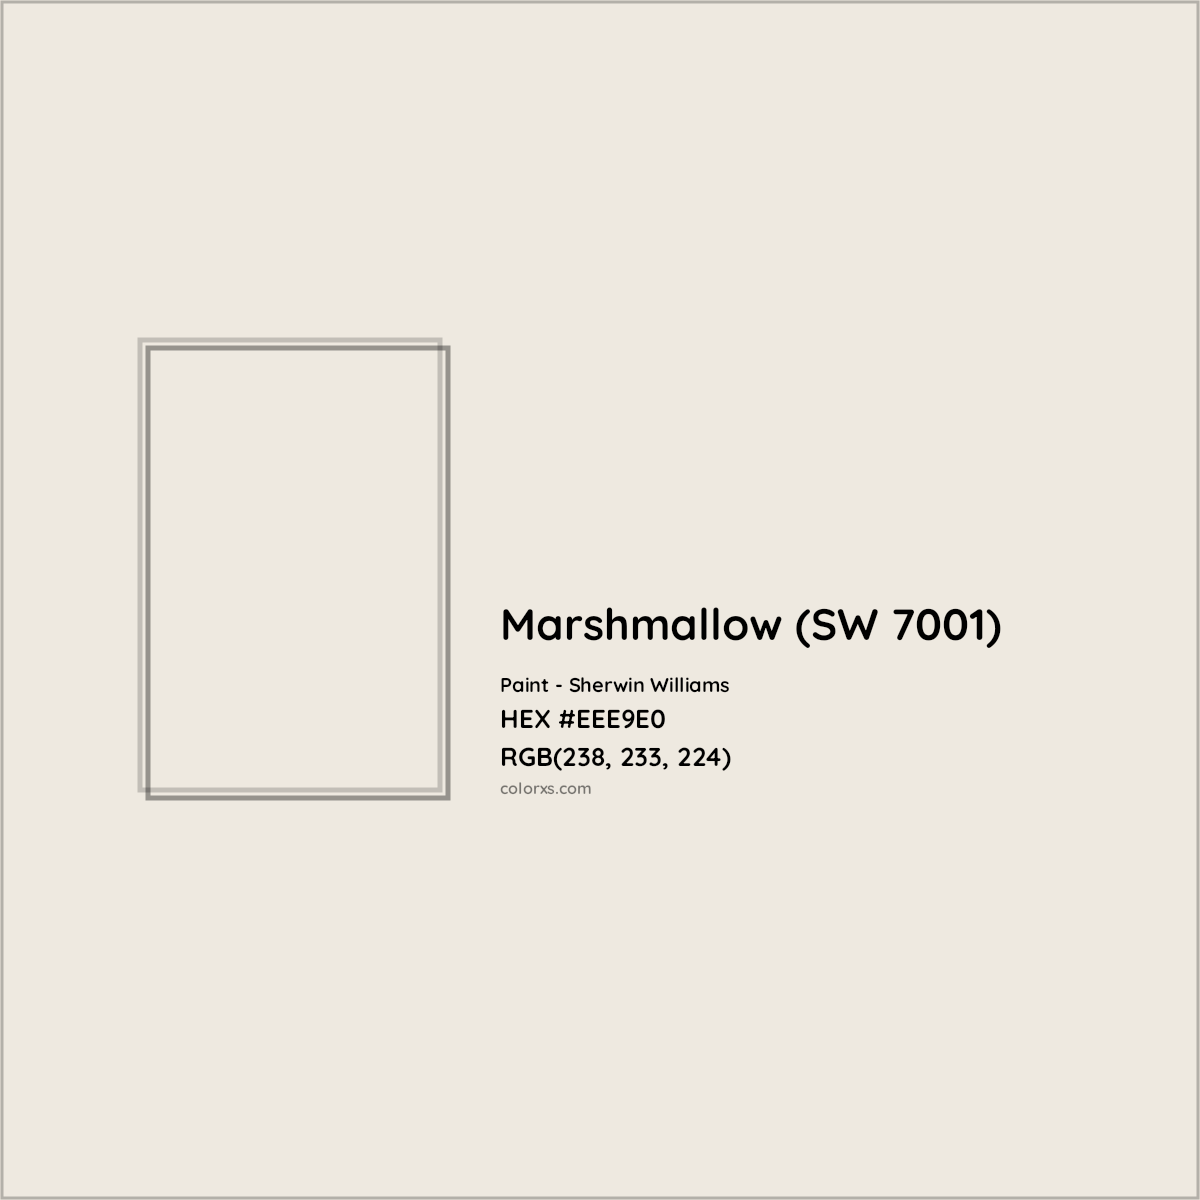 HEX #EEE9E0 Marshmallow (SW 7001) Paint Sherwin Williams - Color Code